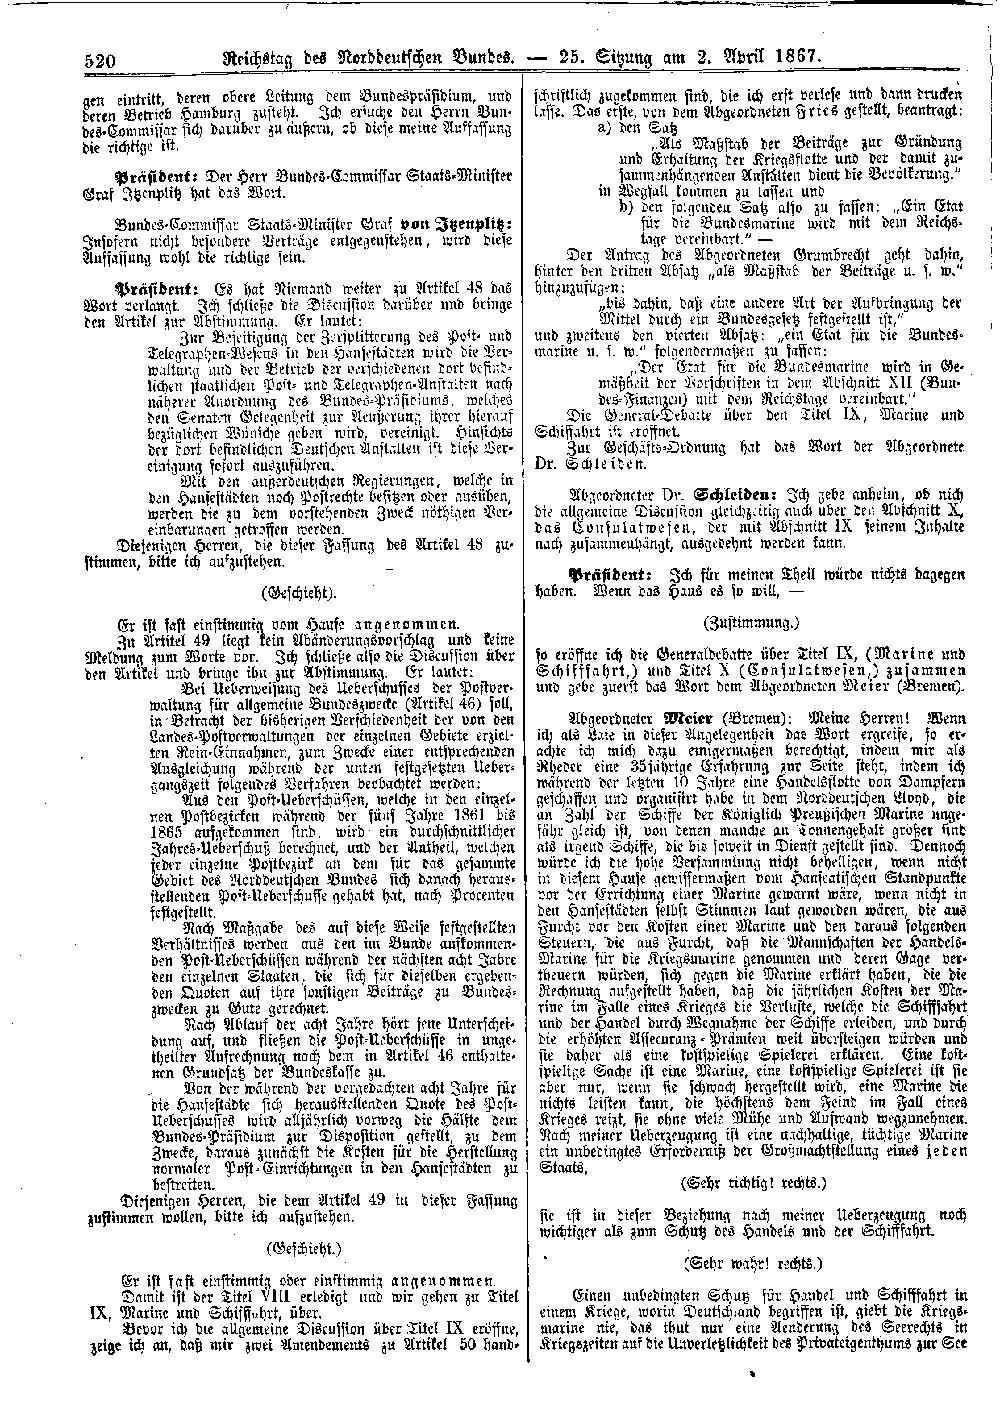 Scan of page 520